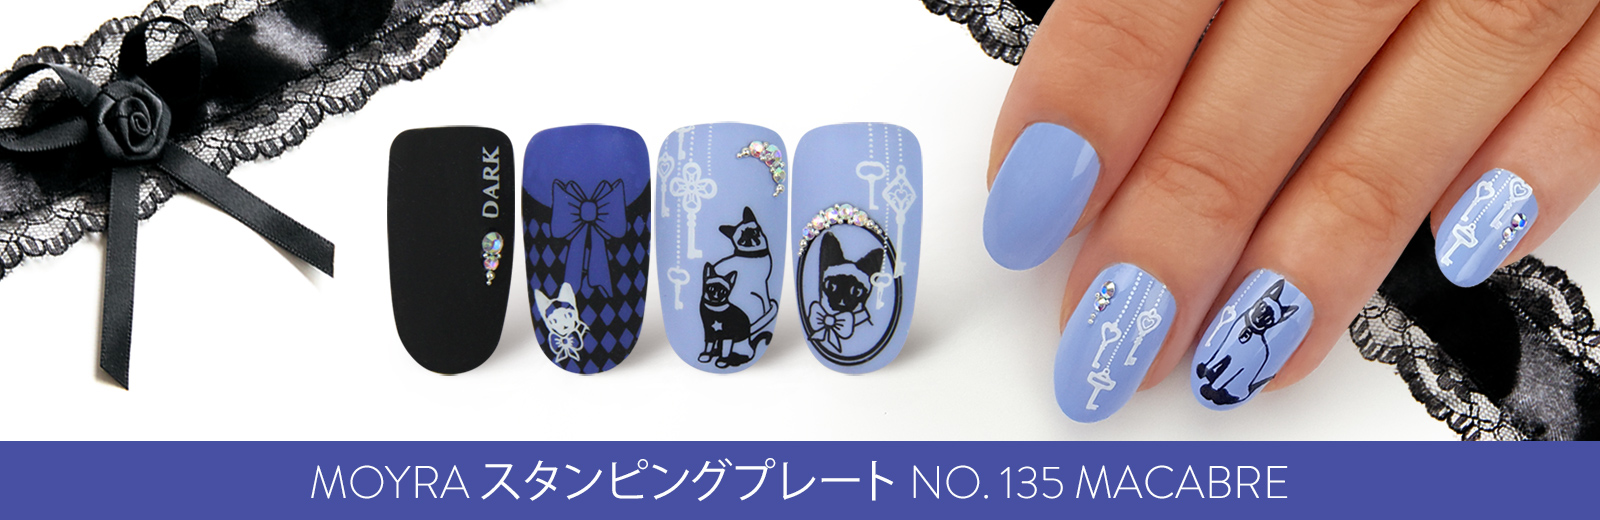 Moyra スタンピングプレート Stamping plate 135 Macabre